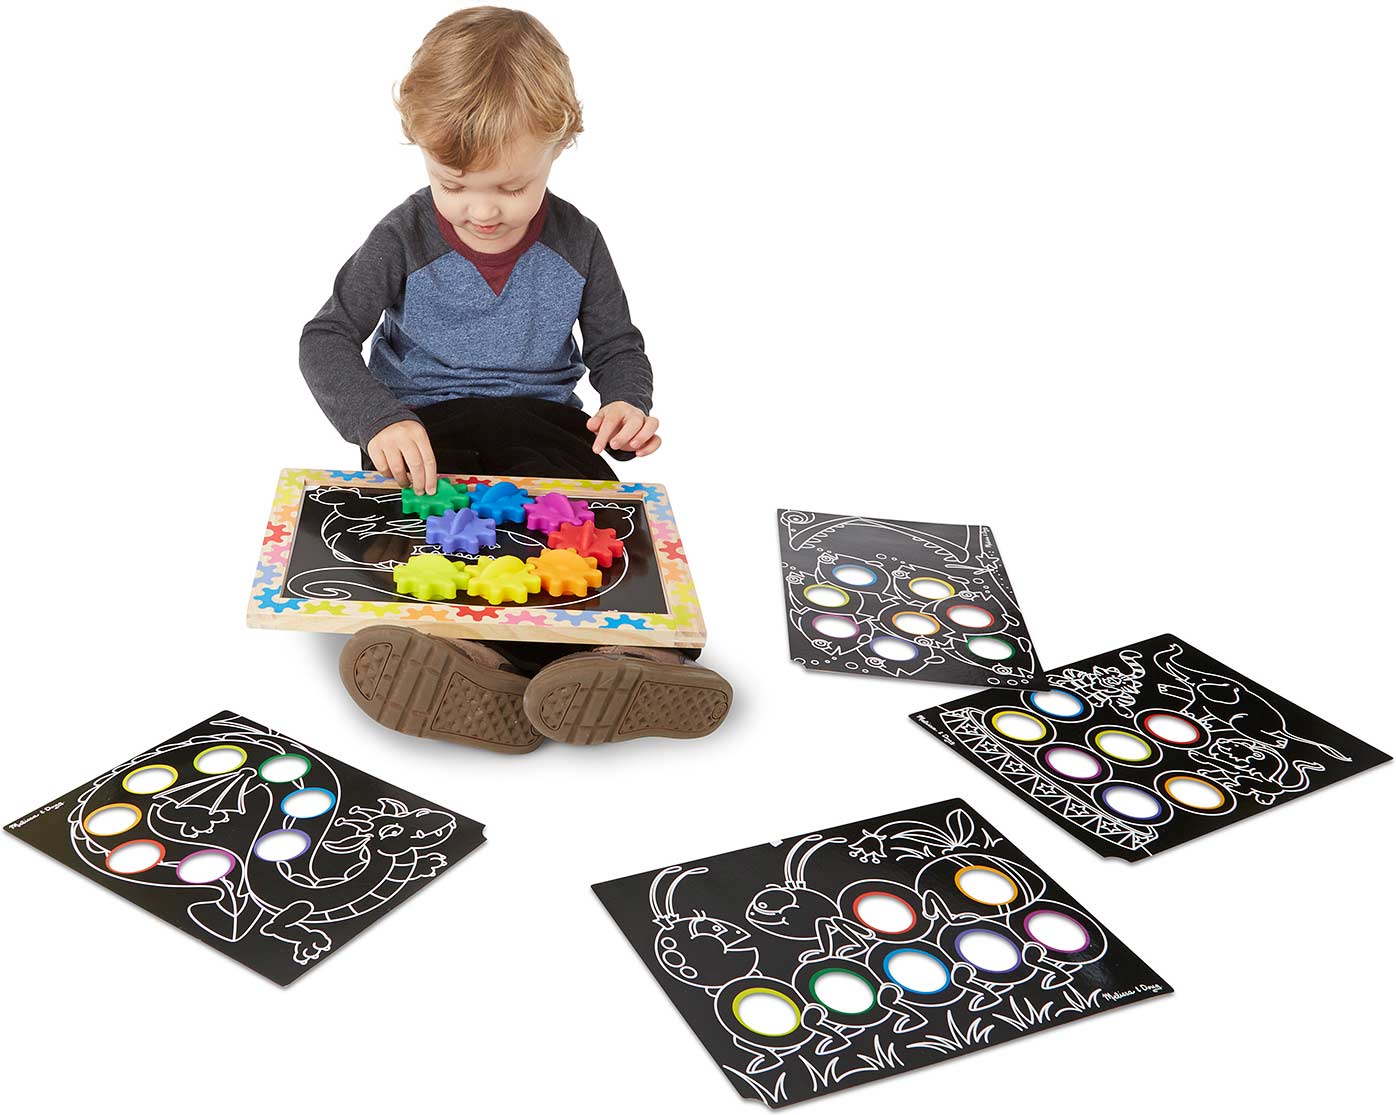 Switch & Spin Magnetic Gear Board - Grand Rabbits Toys in Boulder, Colorado